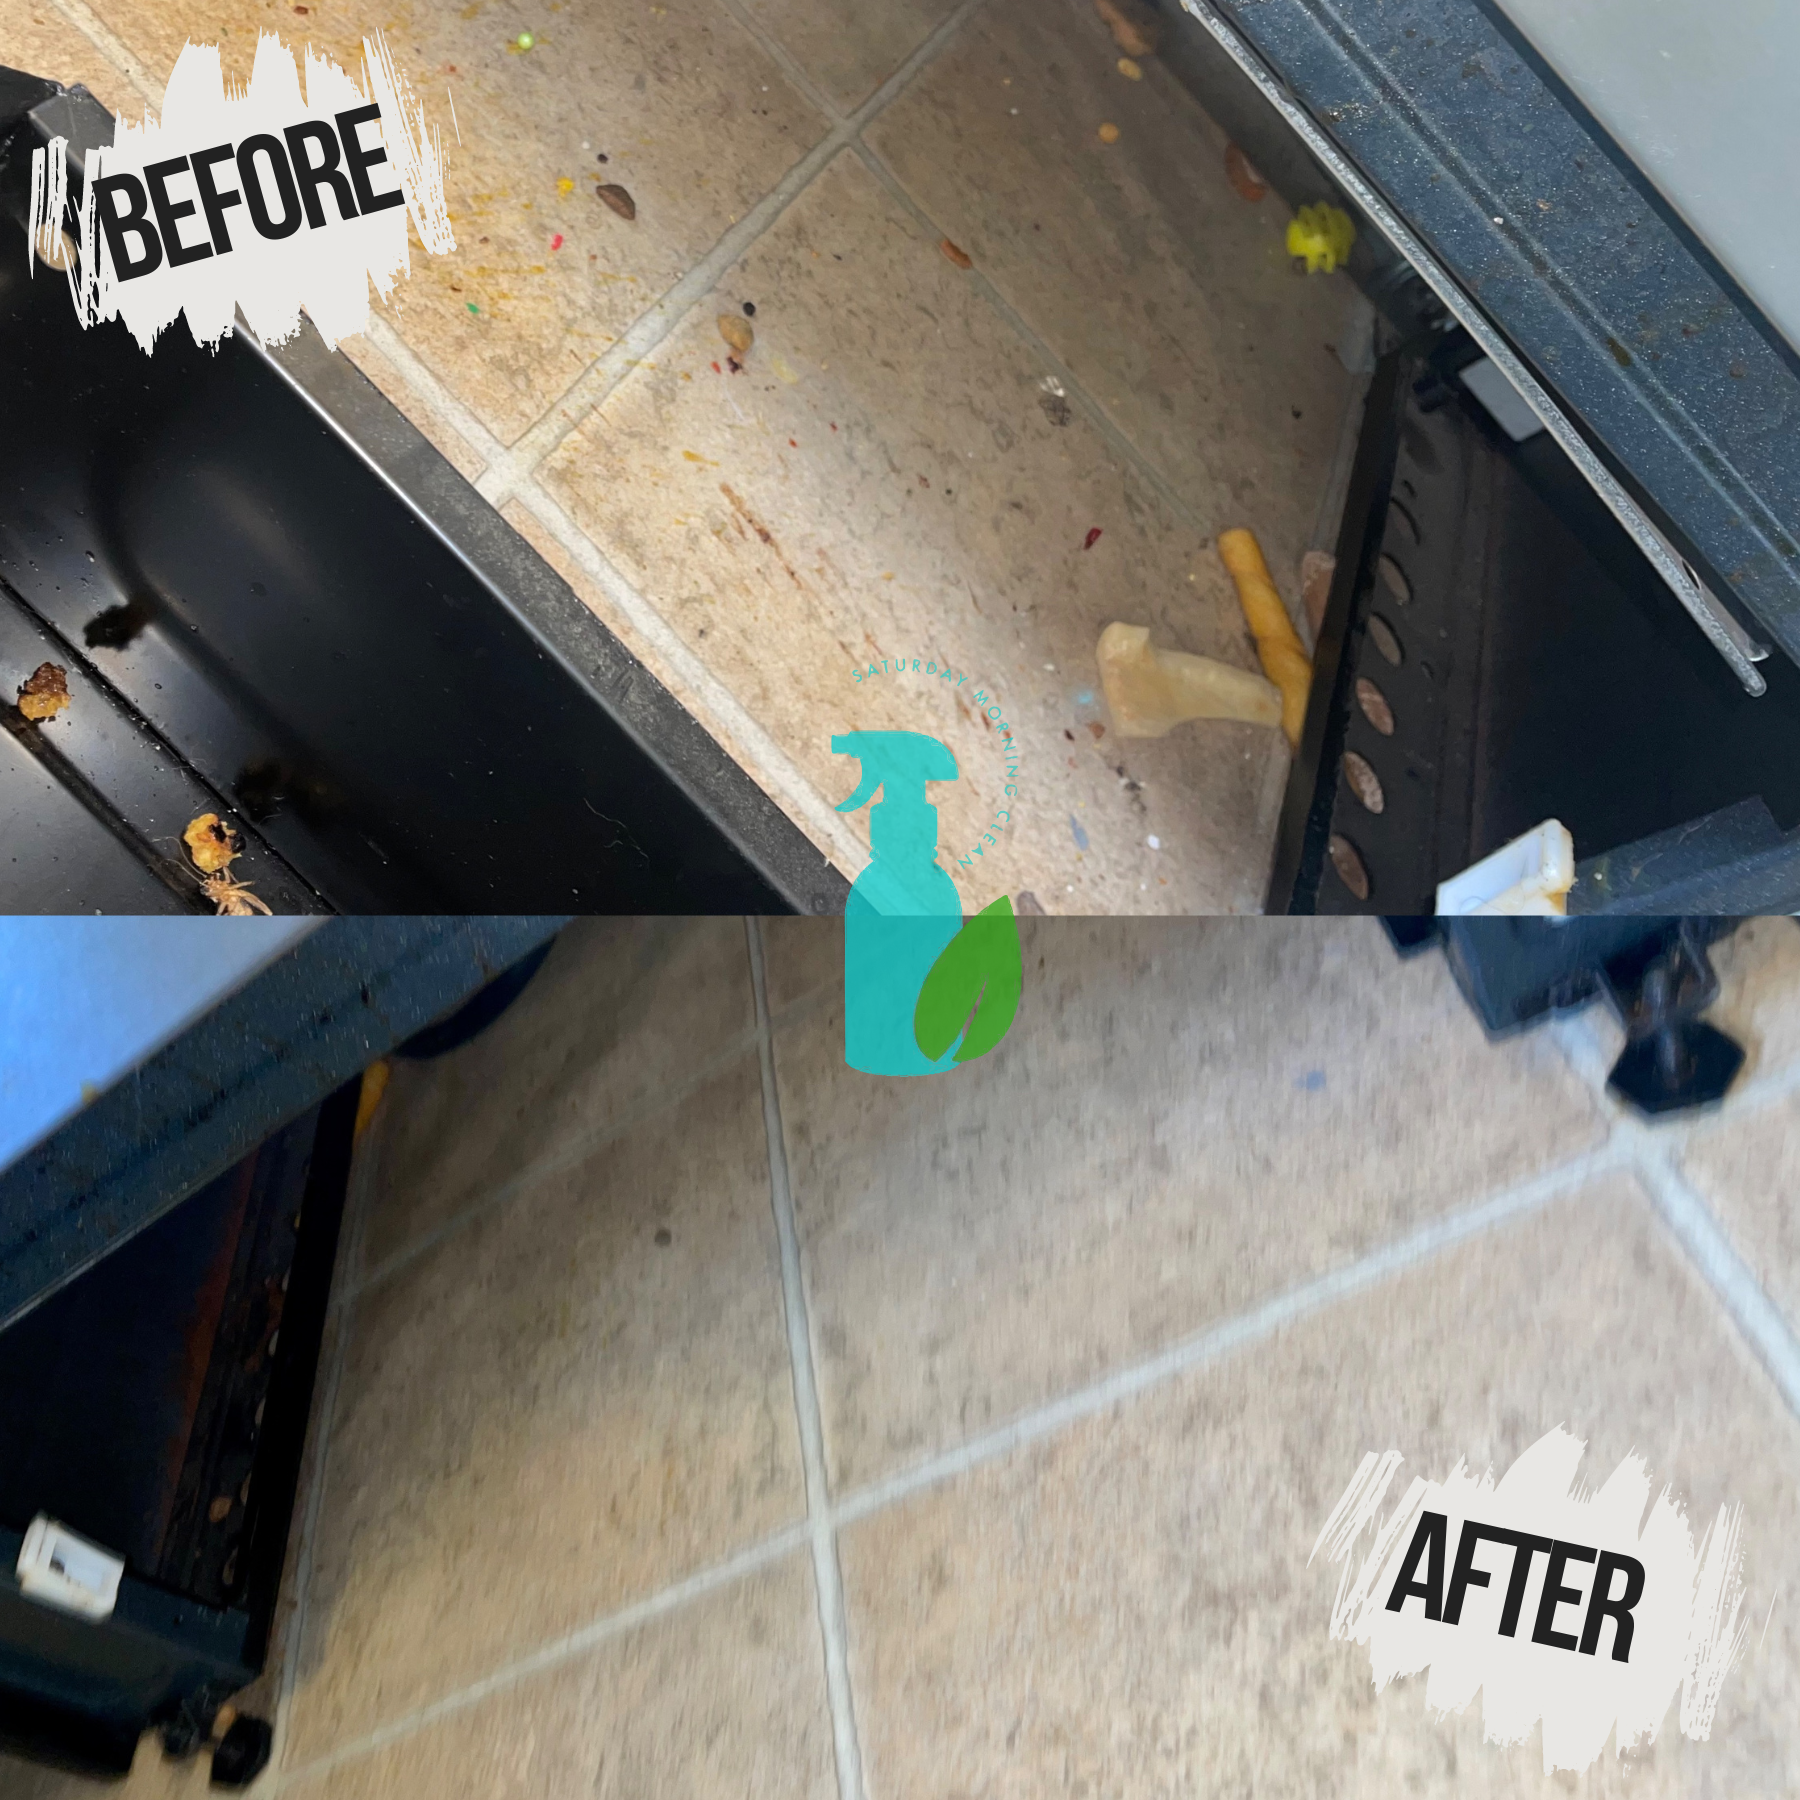 Under oven - detailed move-out cleaning